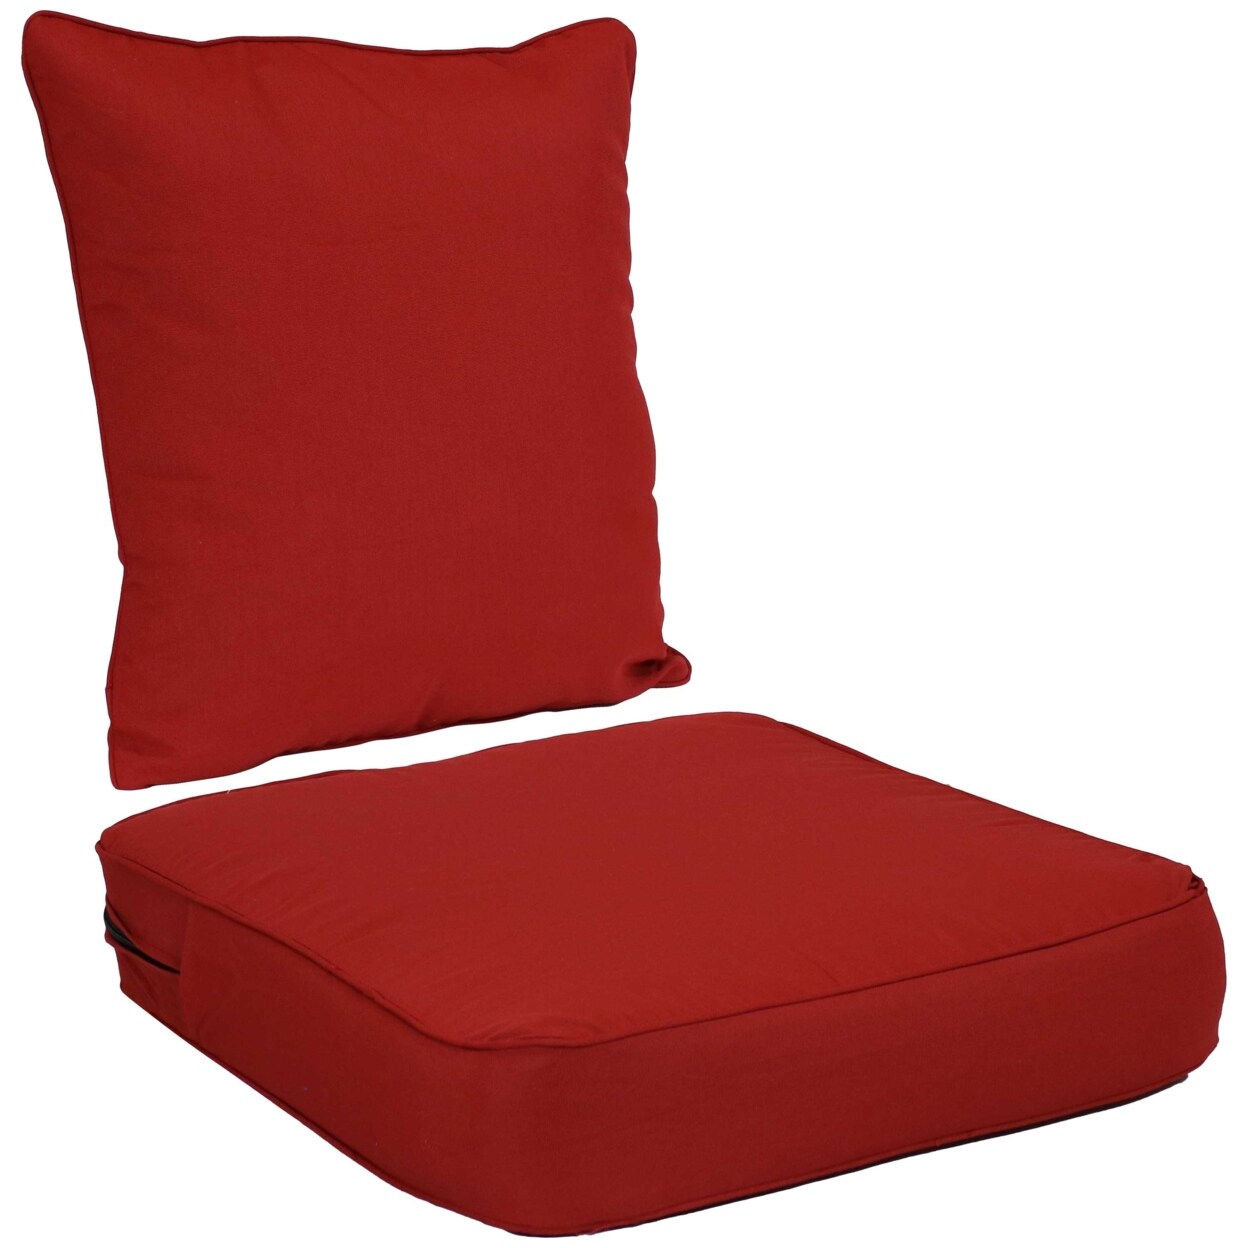 Sunnydaze   Indoor/Outdoor Polyester Back and Seat Cushions - Red